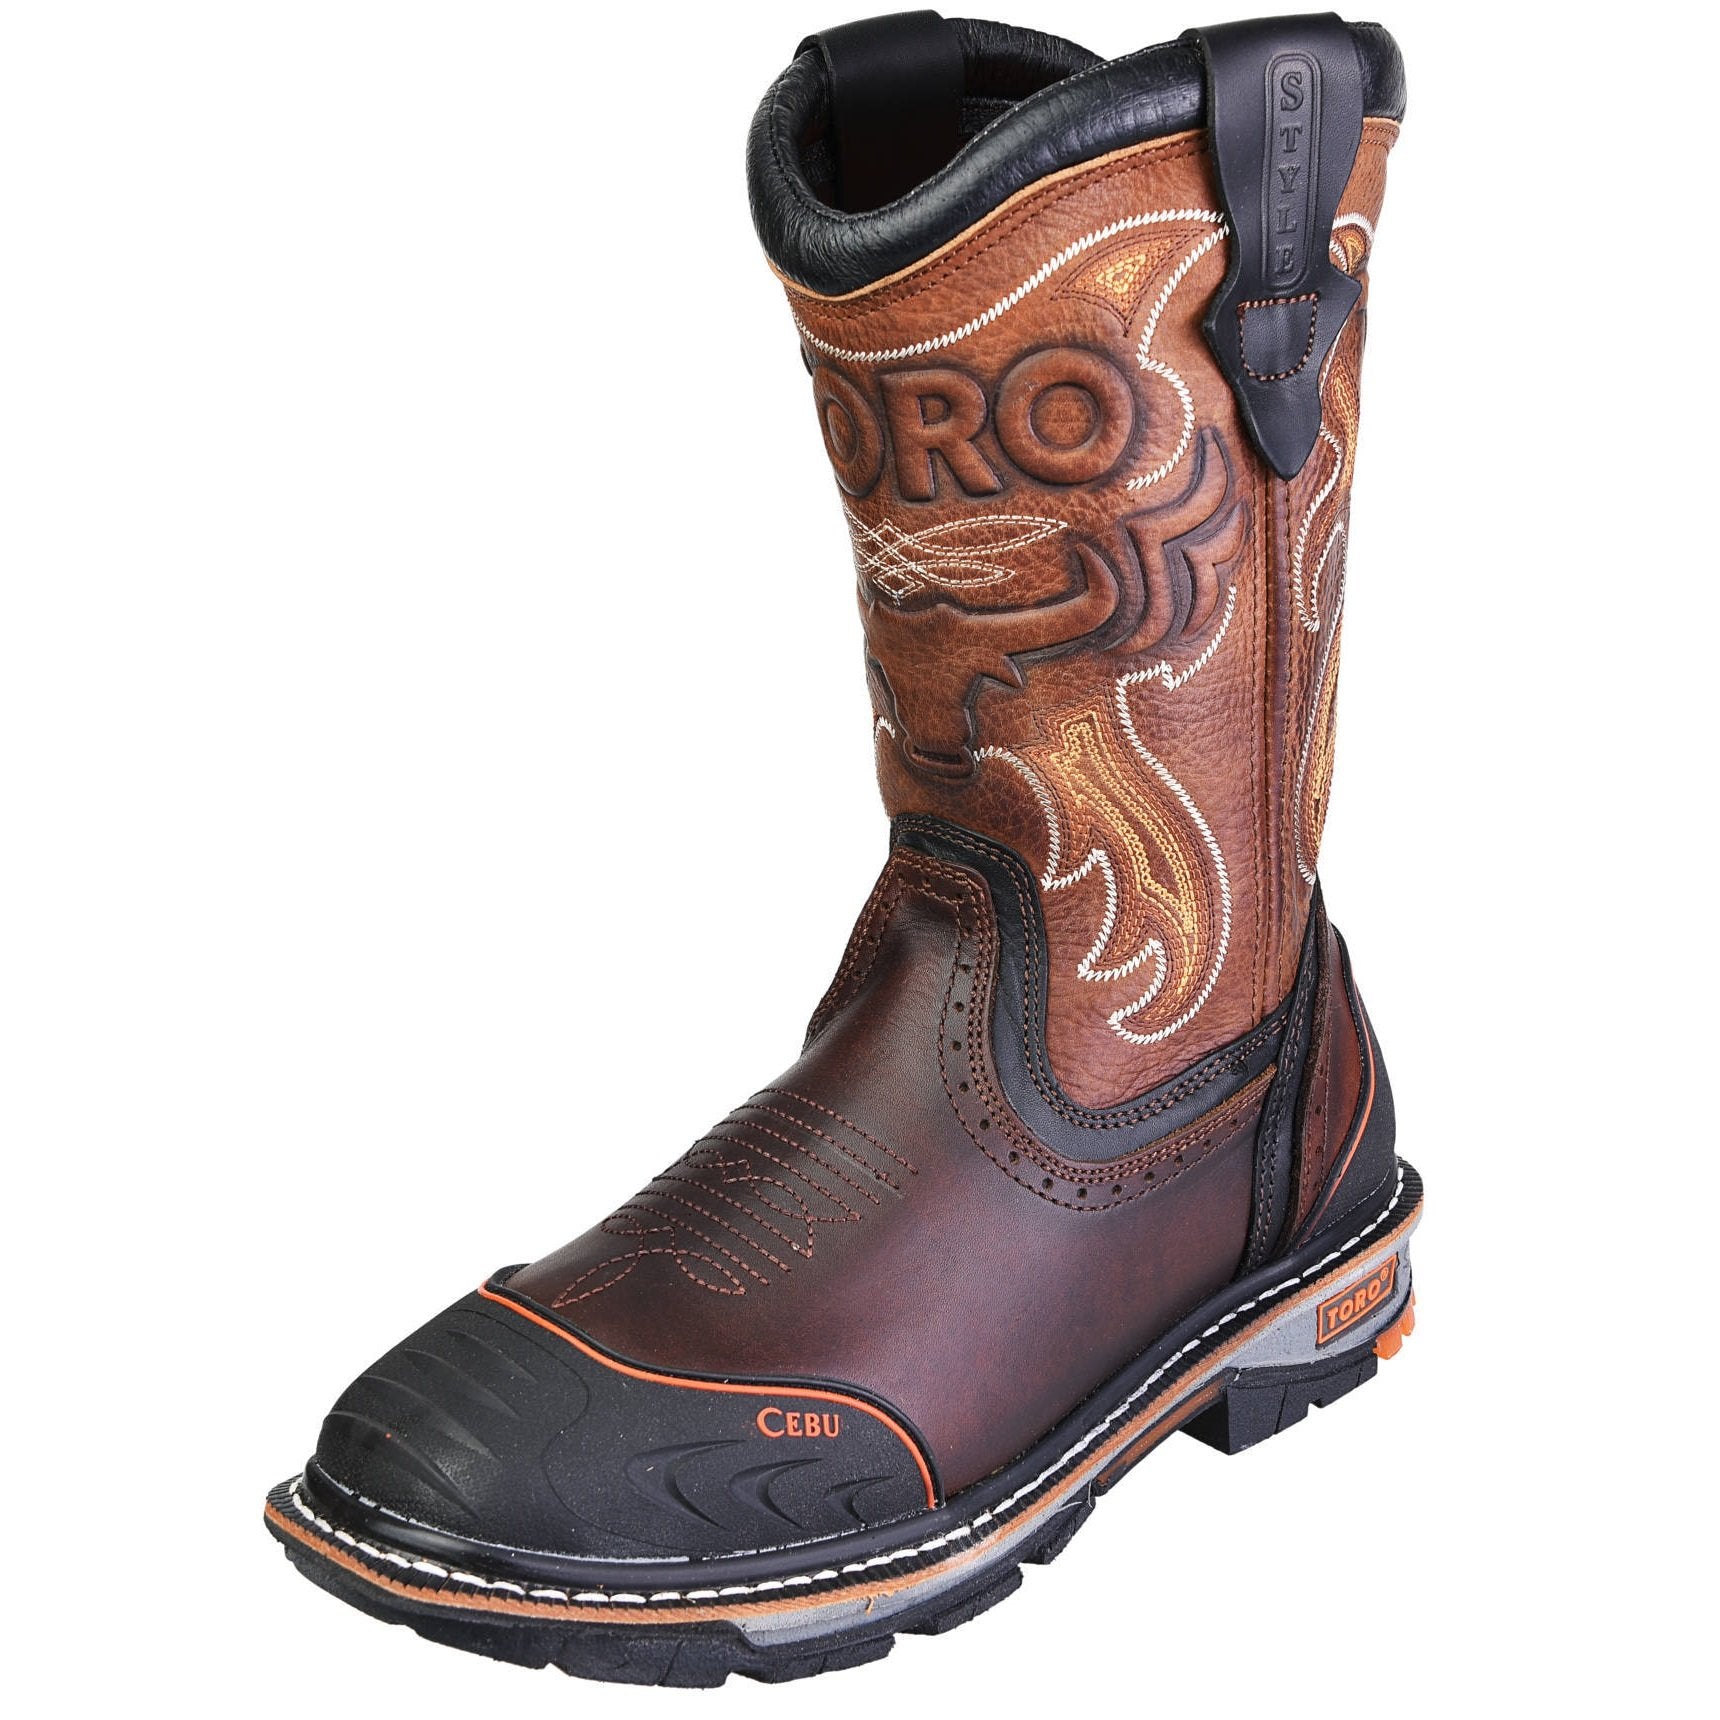 Men's Work Boots - 3-Layer Sole & Rubber Shield - Brown Work Boots - Toro Bravo - Pull On Work Boots - Brown Wellington Work Boots